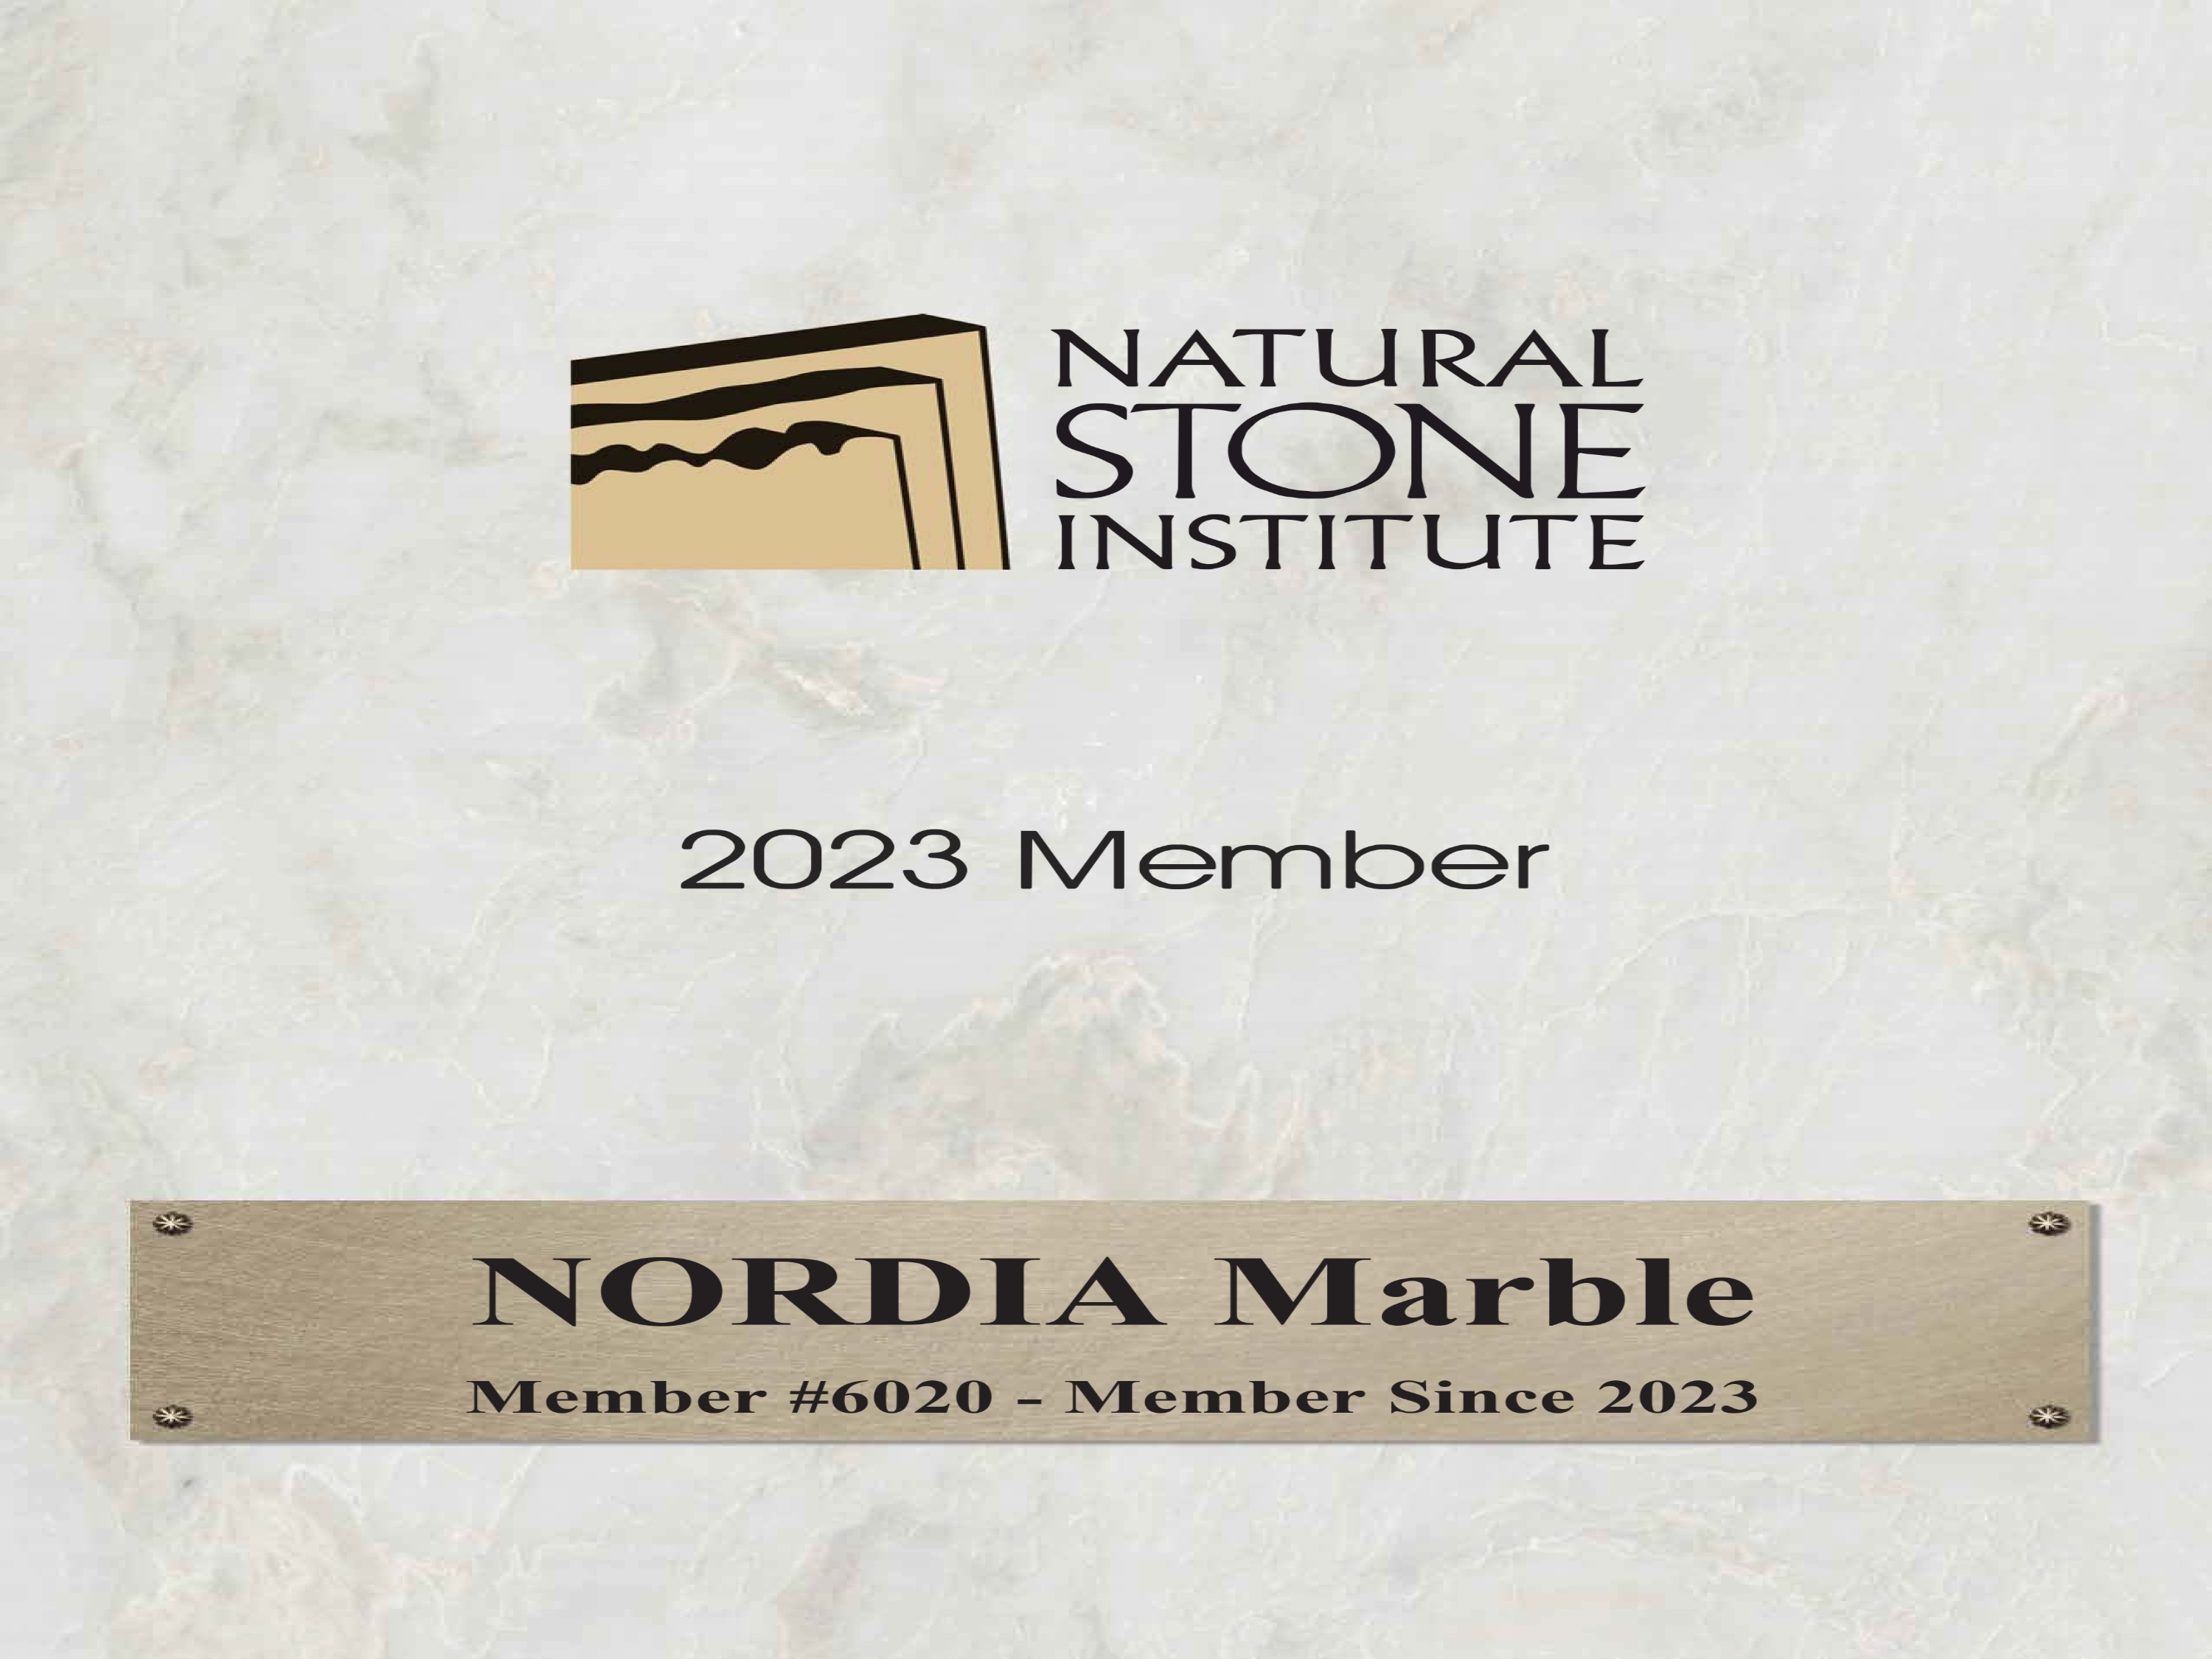 Nordia Marble member of the Natural Stone Institute